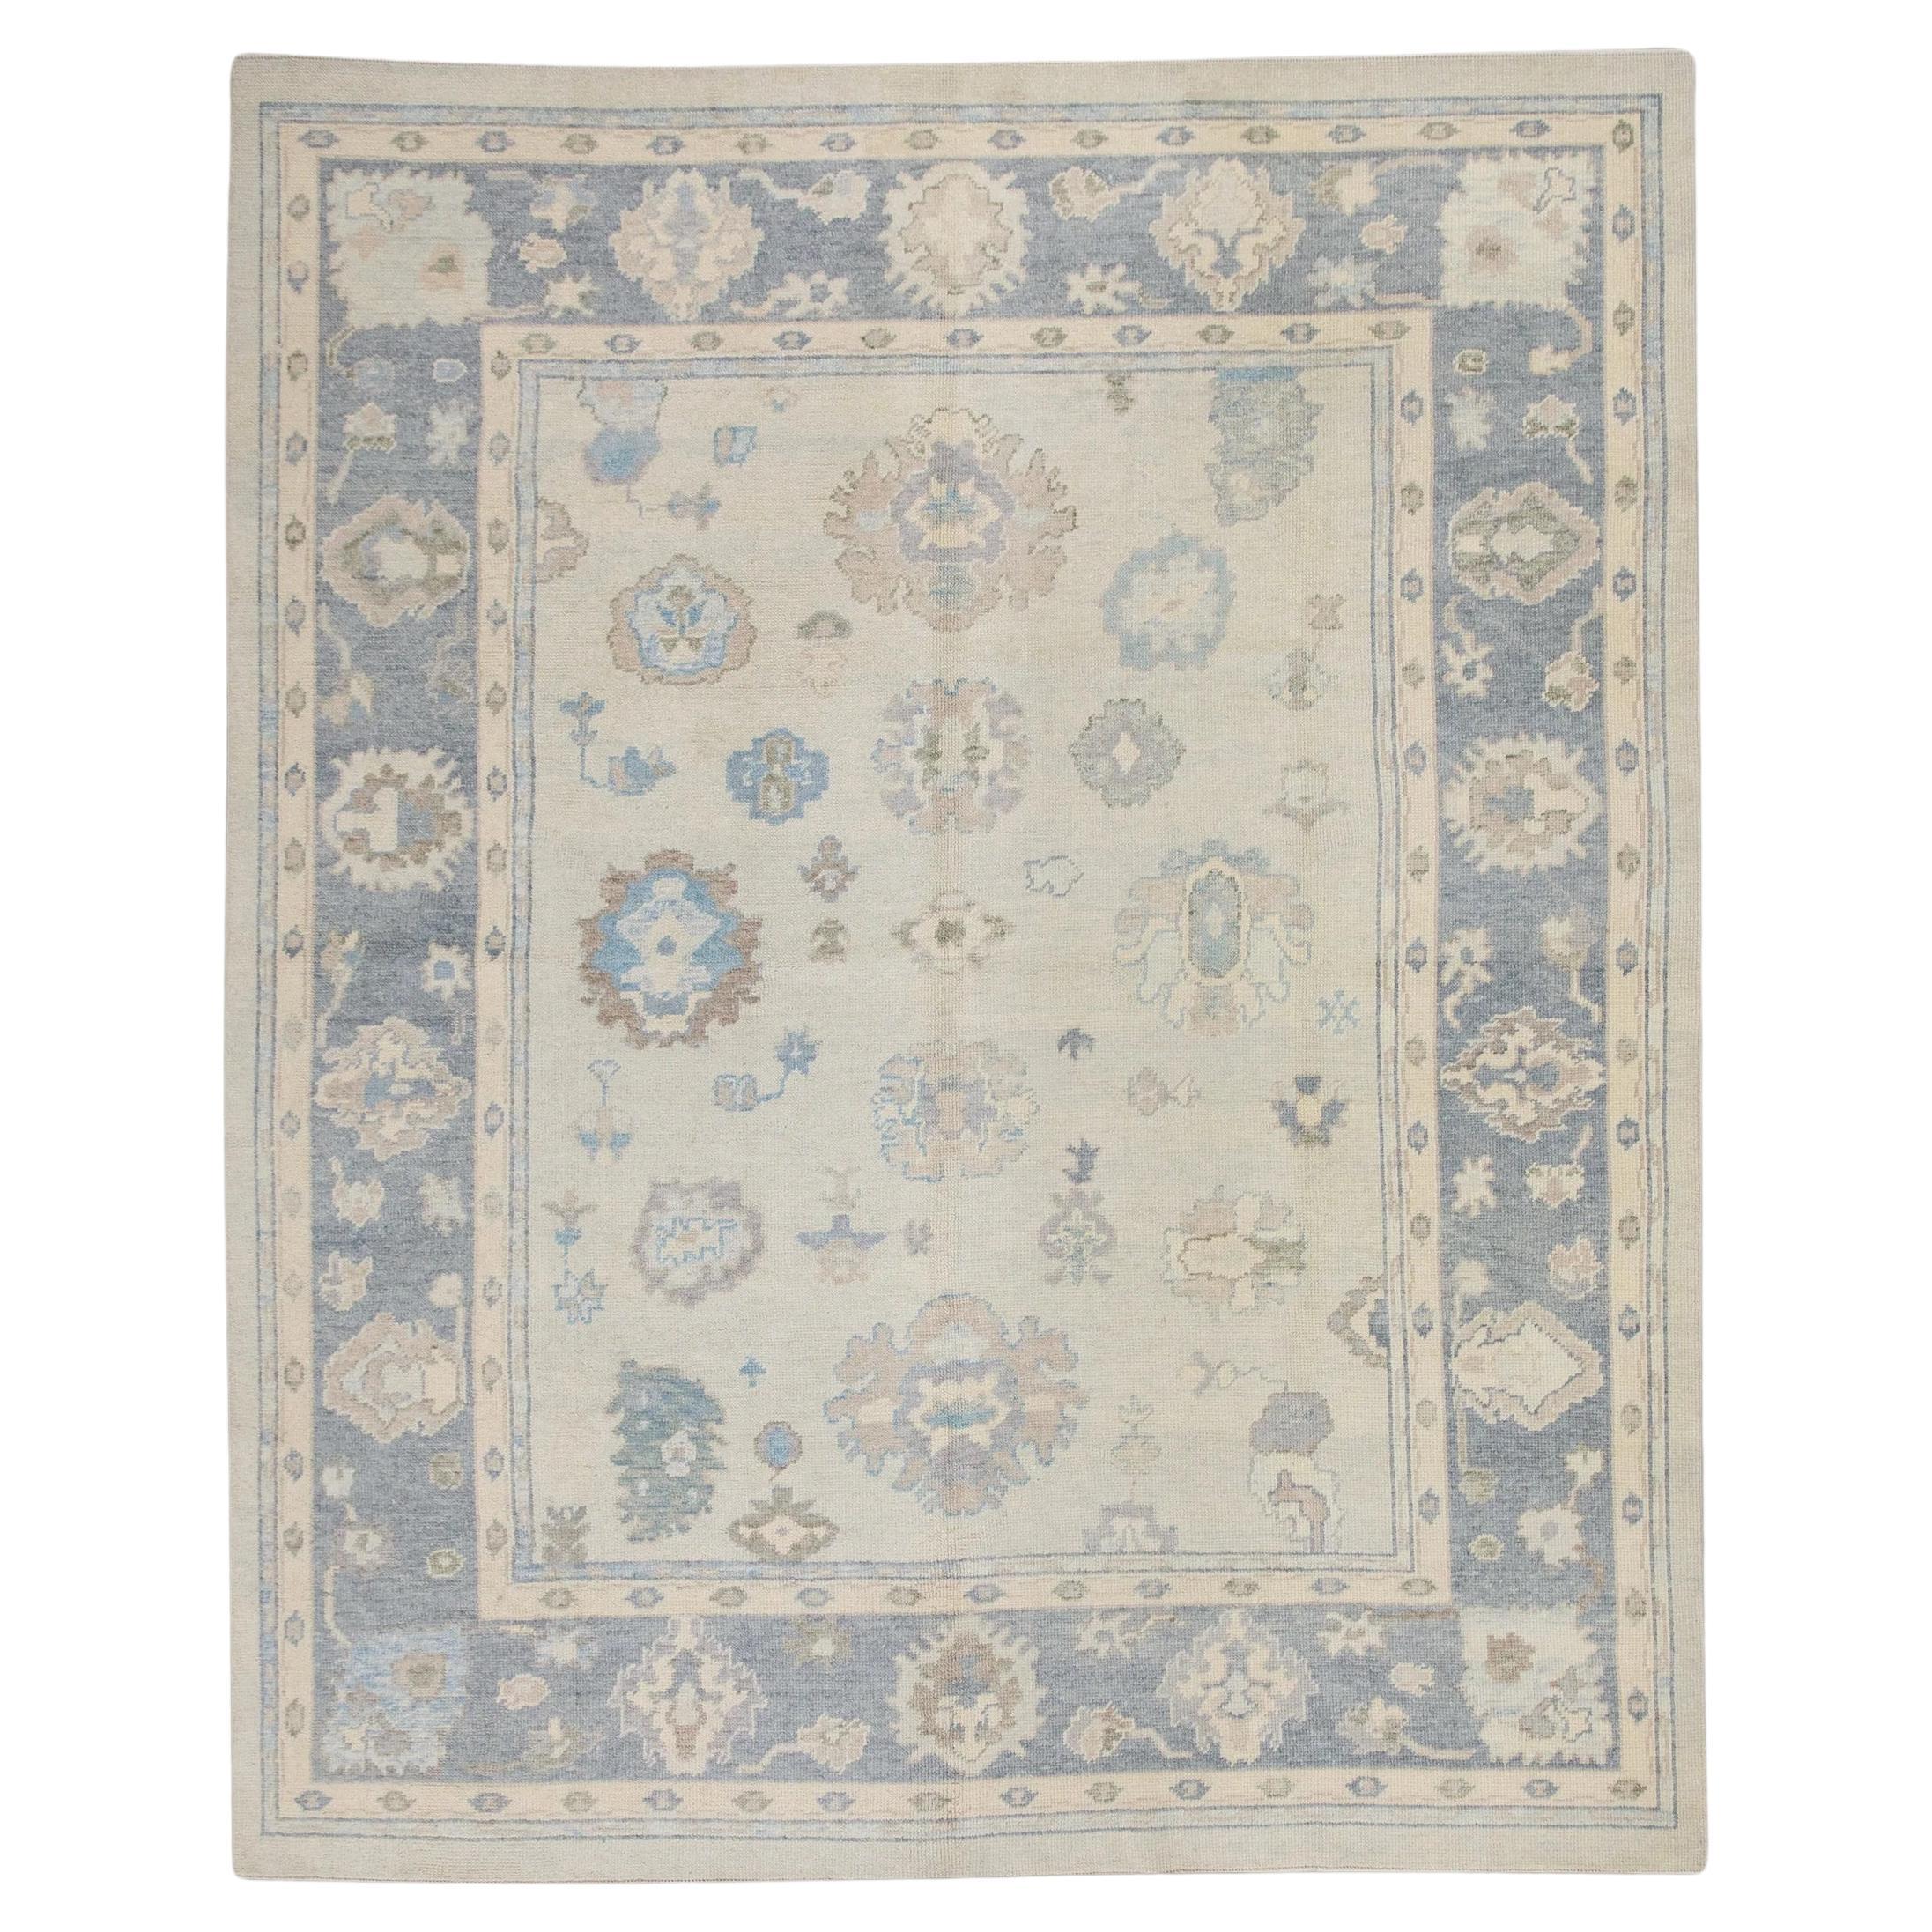 Cream Handwoven Wool Turkish Oushak Rug in Blue Floral Design 8'3" x 10'6" For Sale